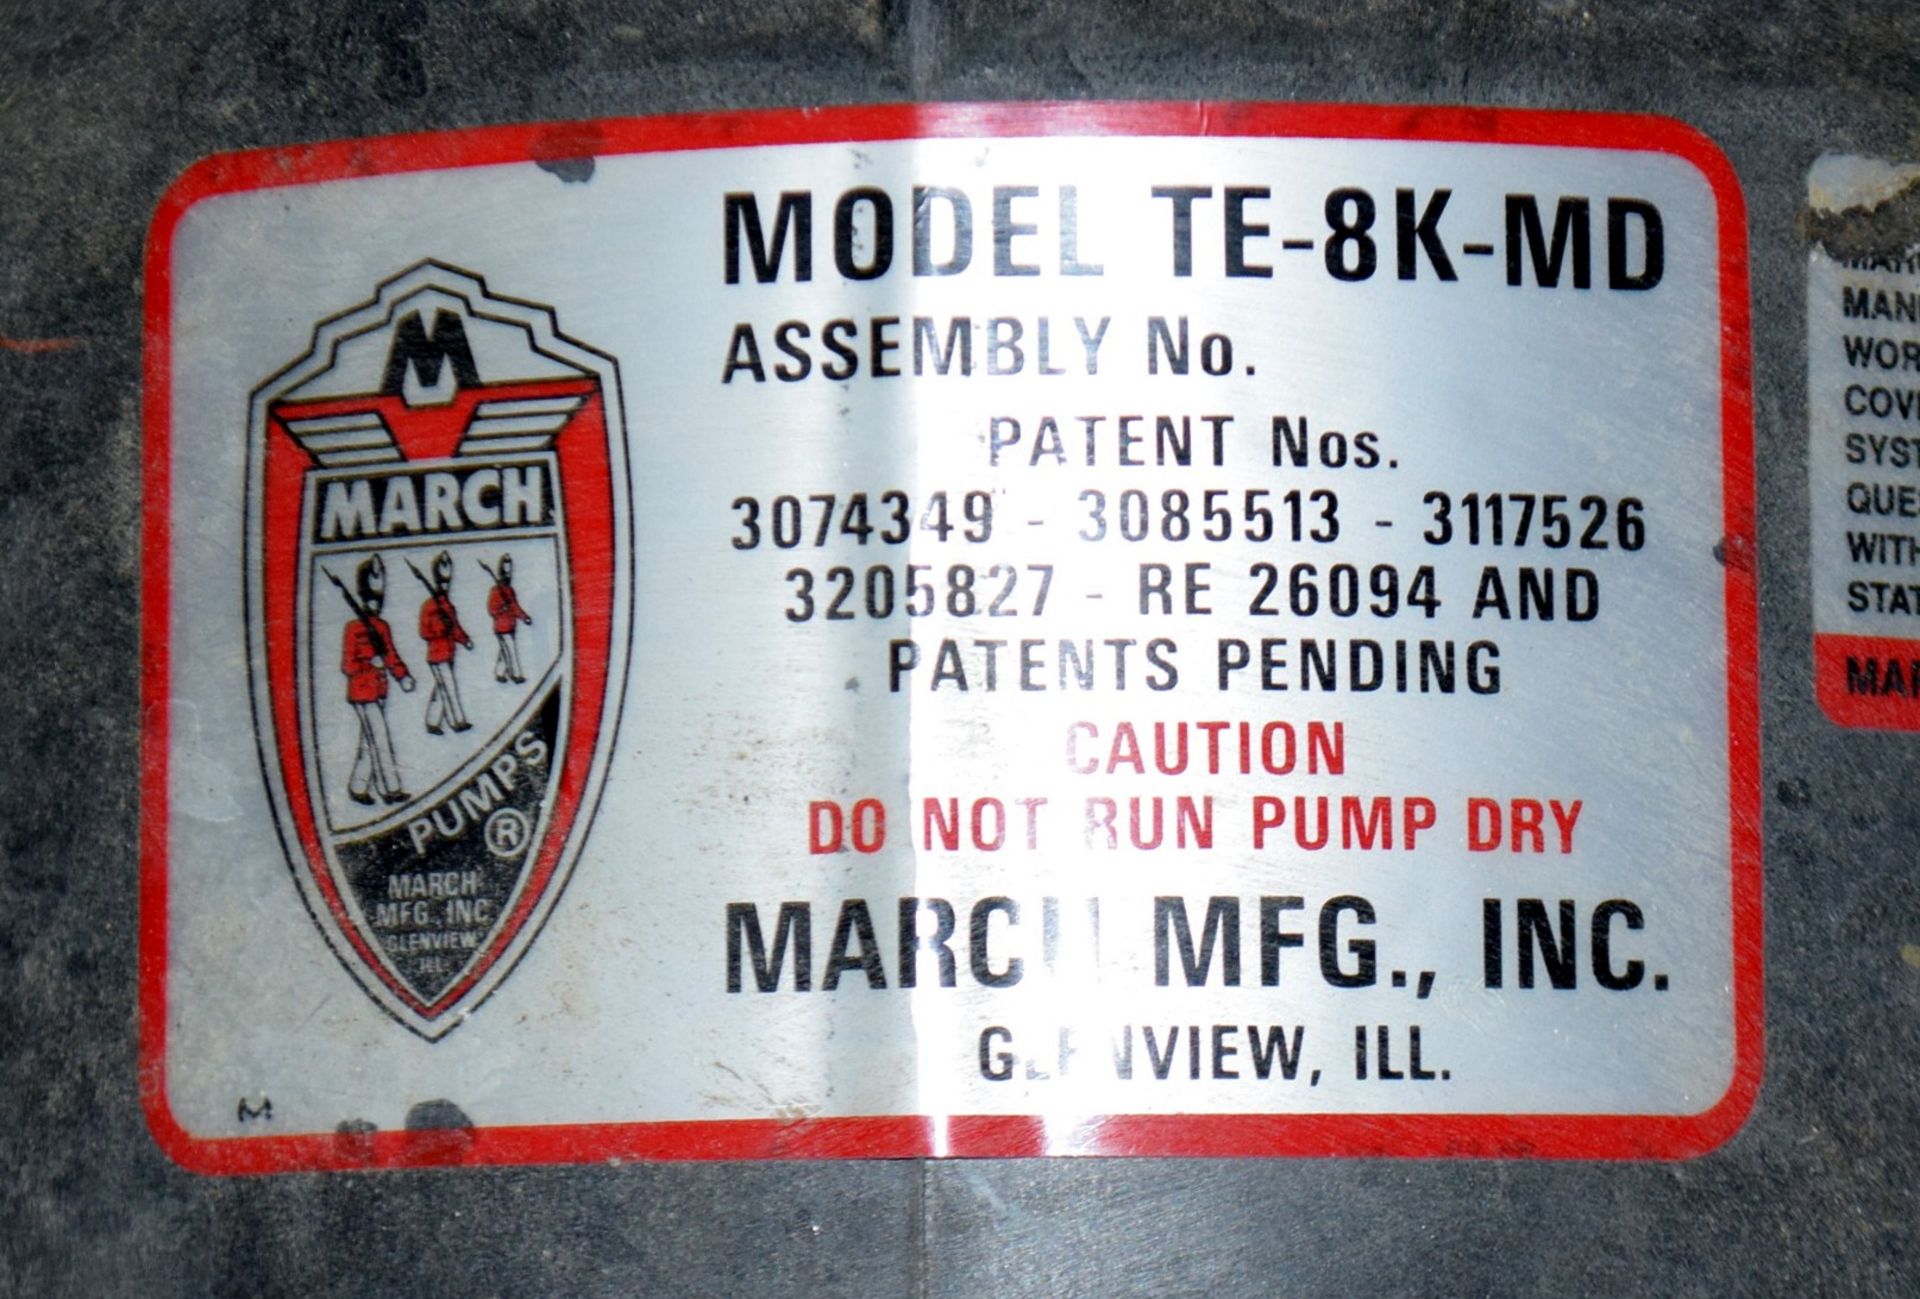 March Polypropylene Pump, Model TE-8K-MD. Driven by a 5hp, 3/60/208-230/460 volt, 3500 rpm motor. - Image 4 of 4